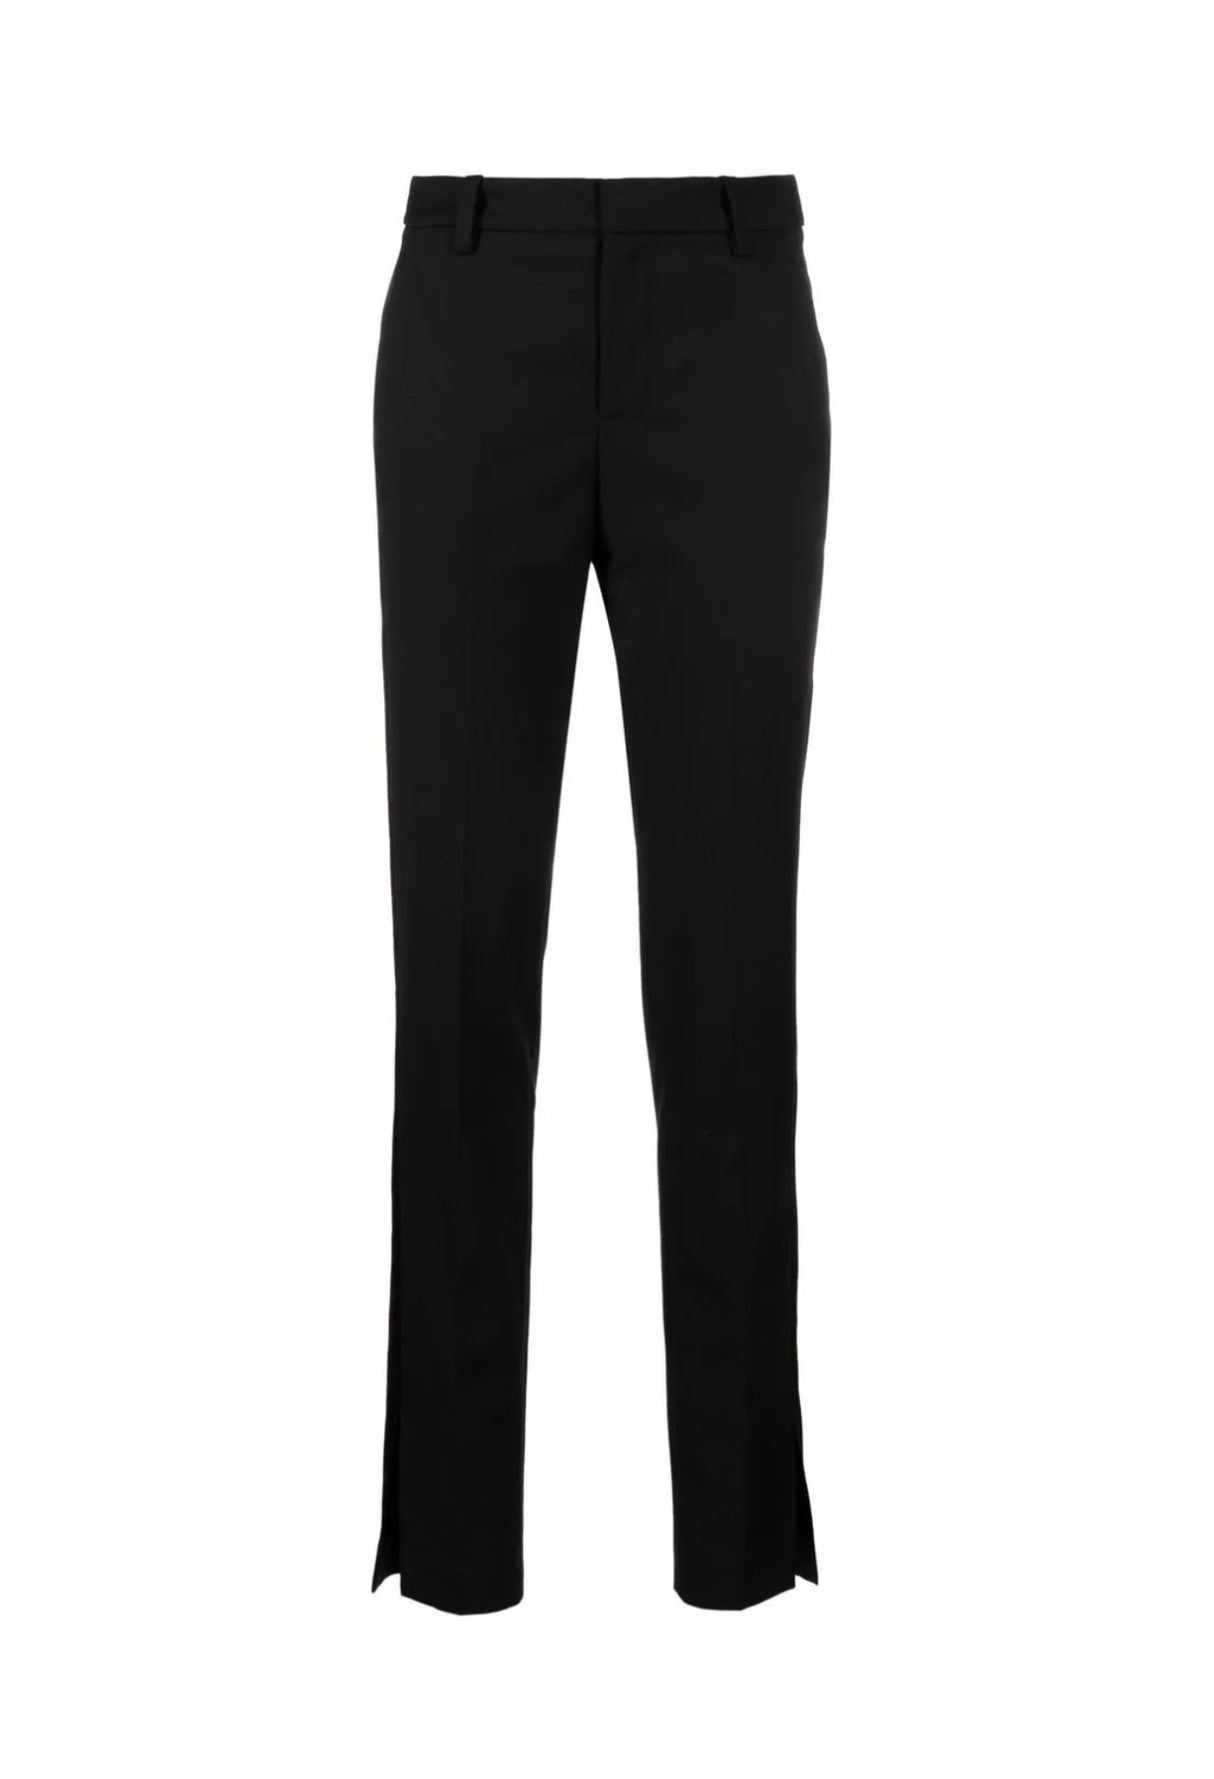 Zadig & Voltaire Size Stripe Tailored Trousers - Noir